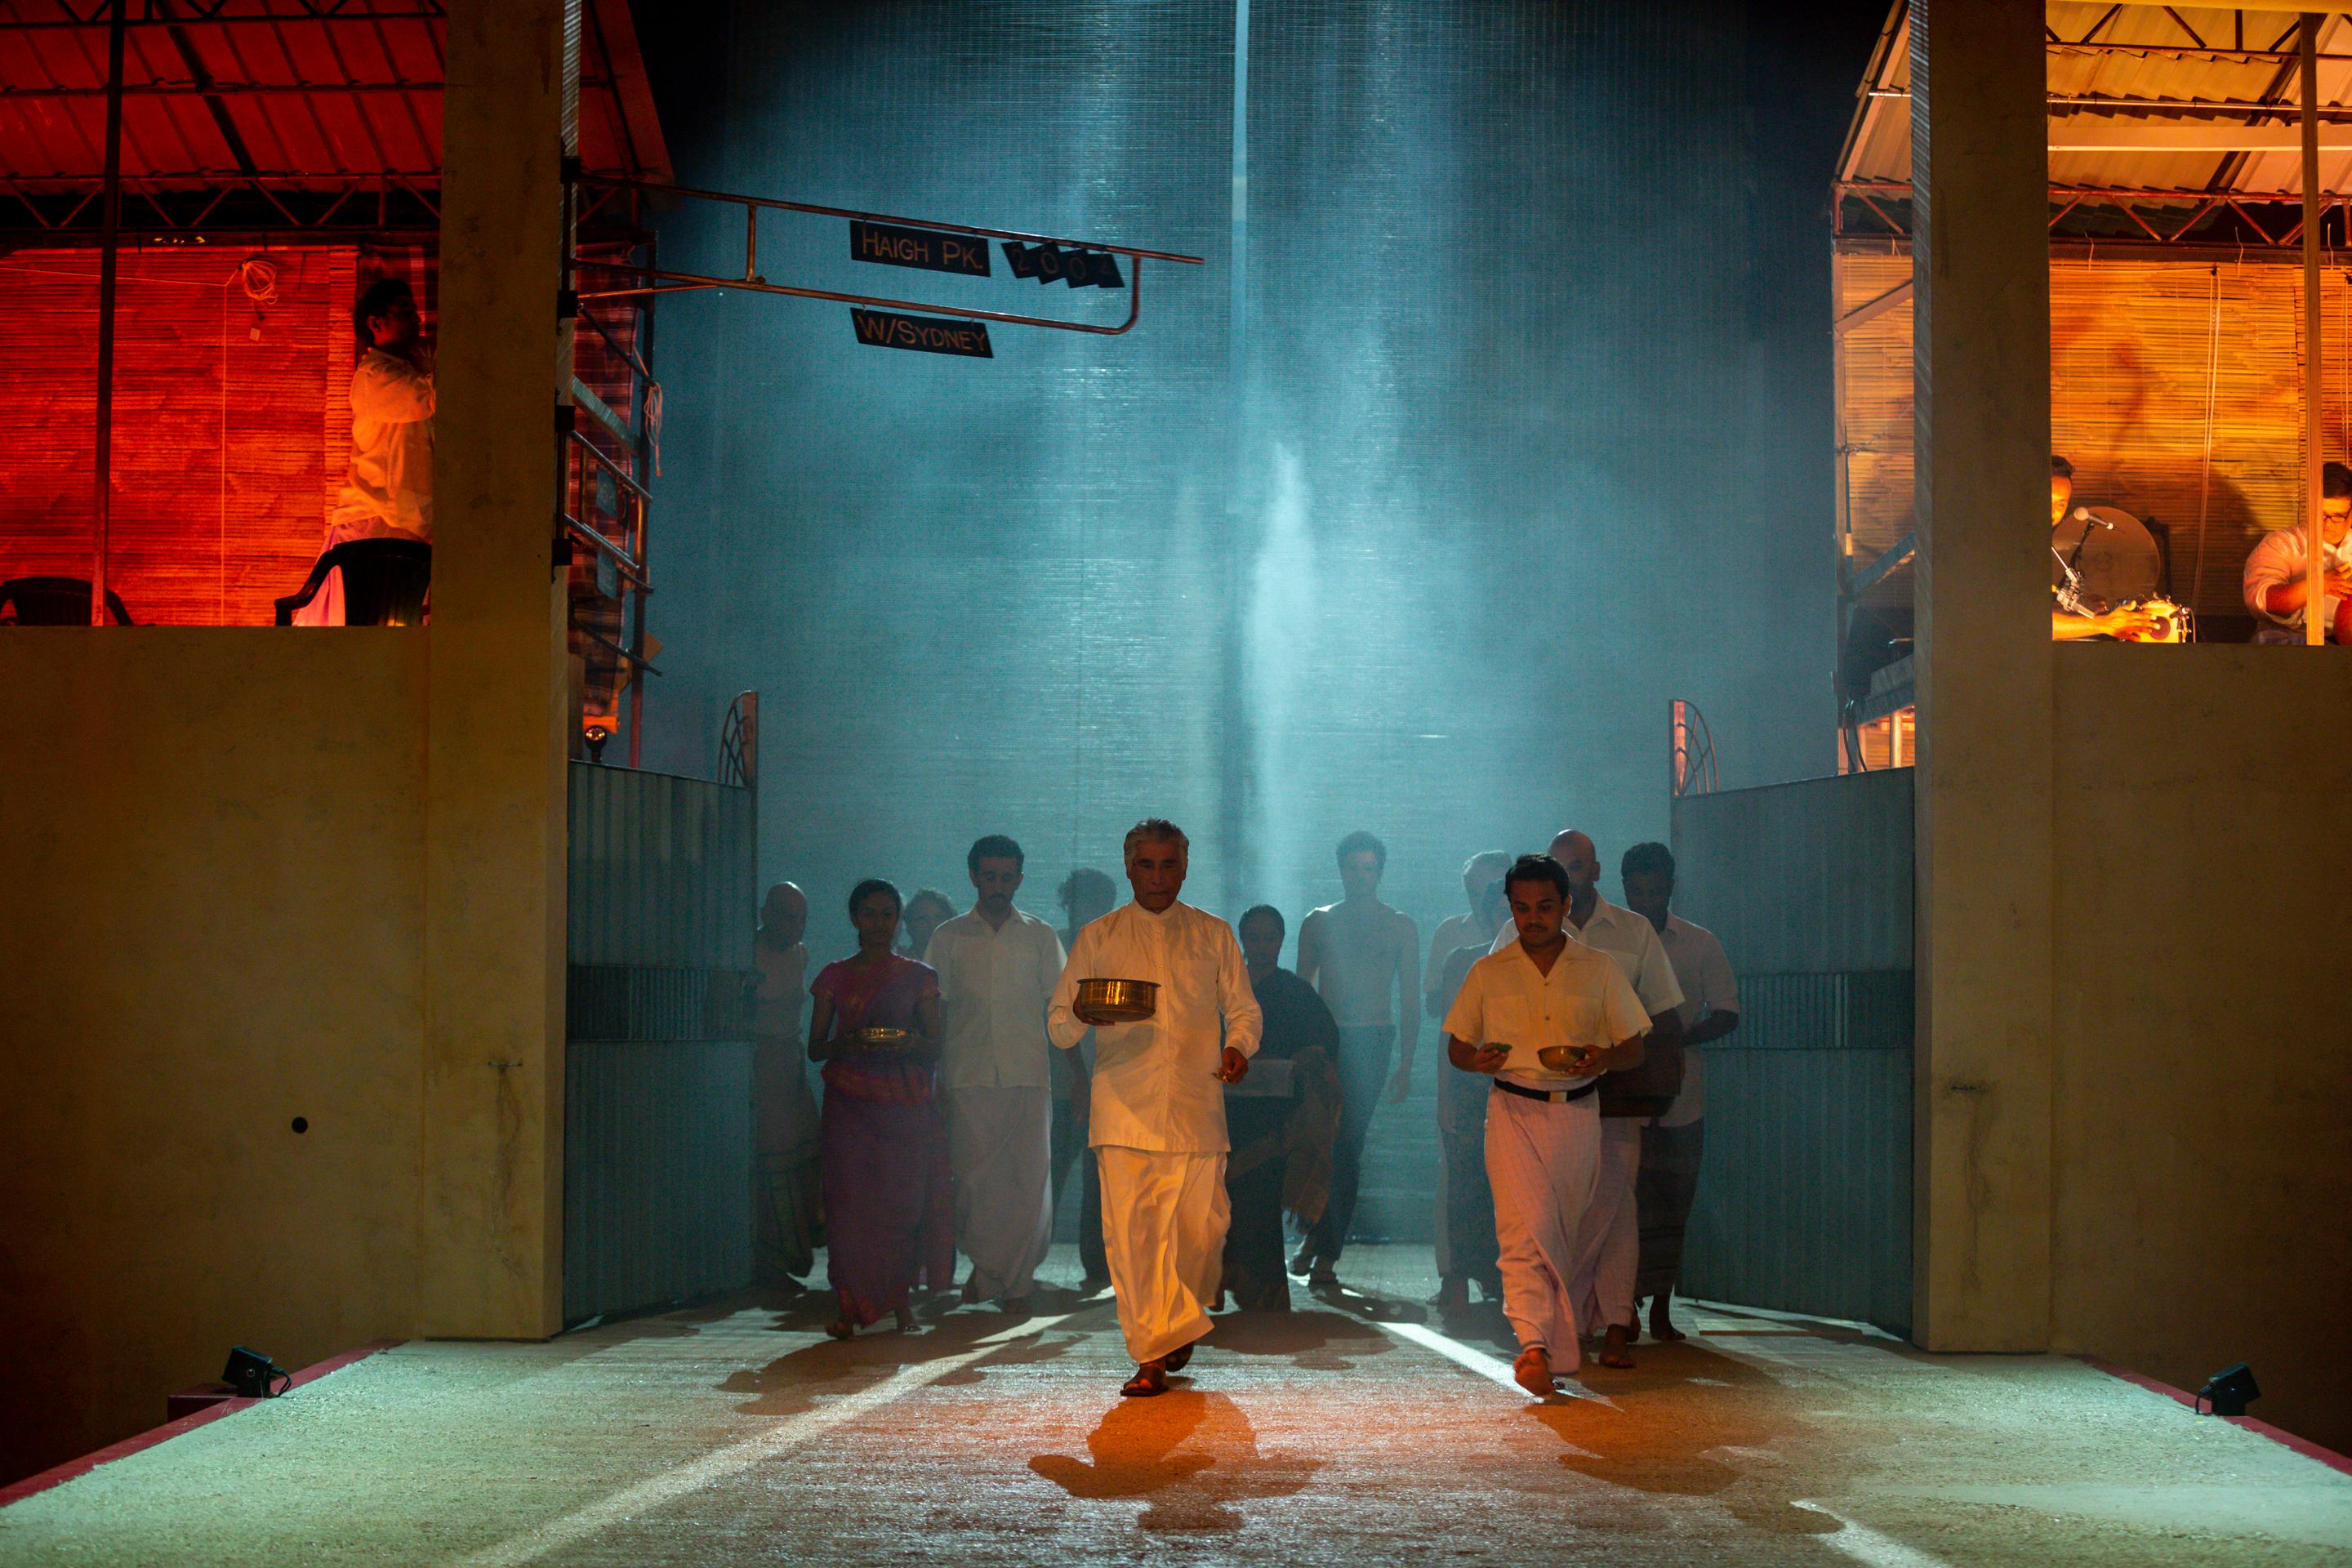 A procession of people dressed in white traditional clothes emerges from a beam of light in a misty, atmospheric setting.